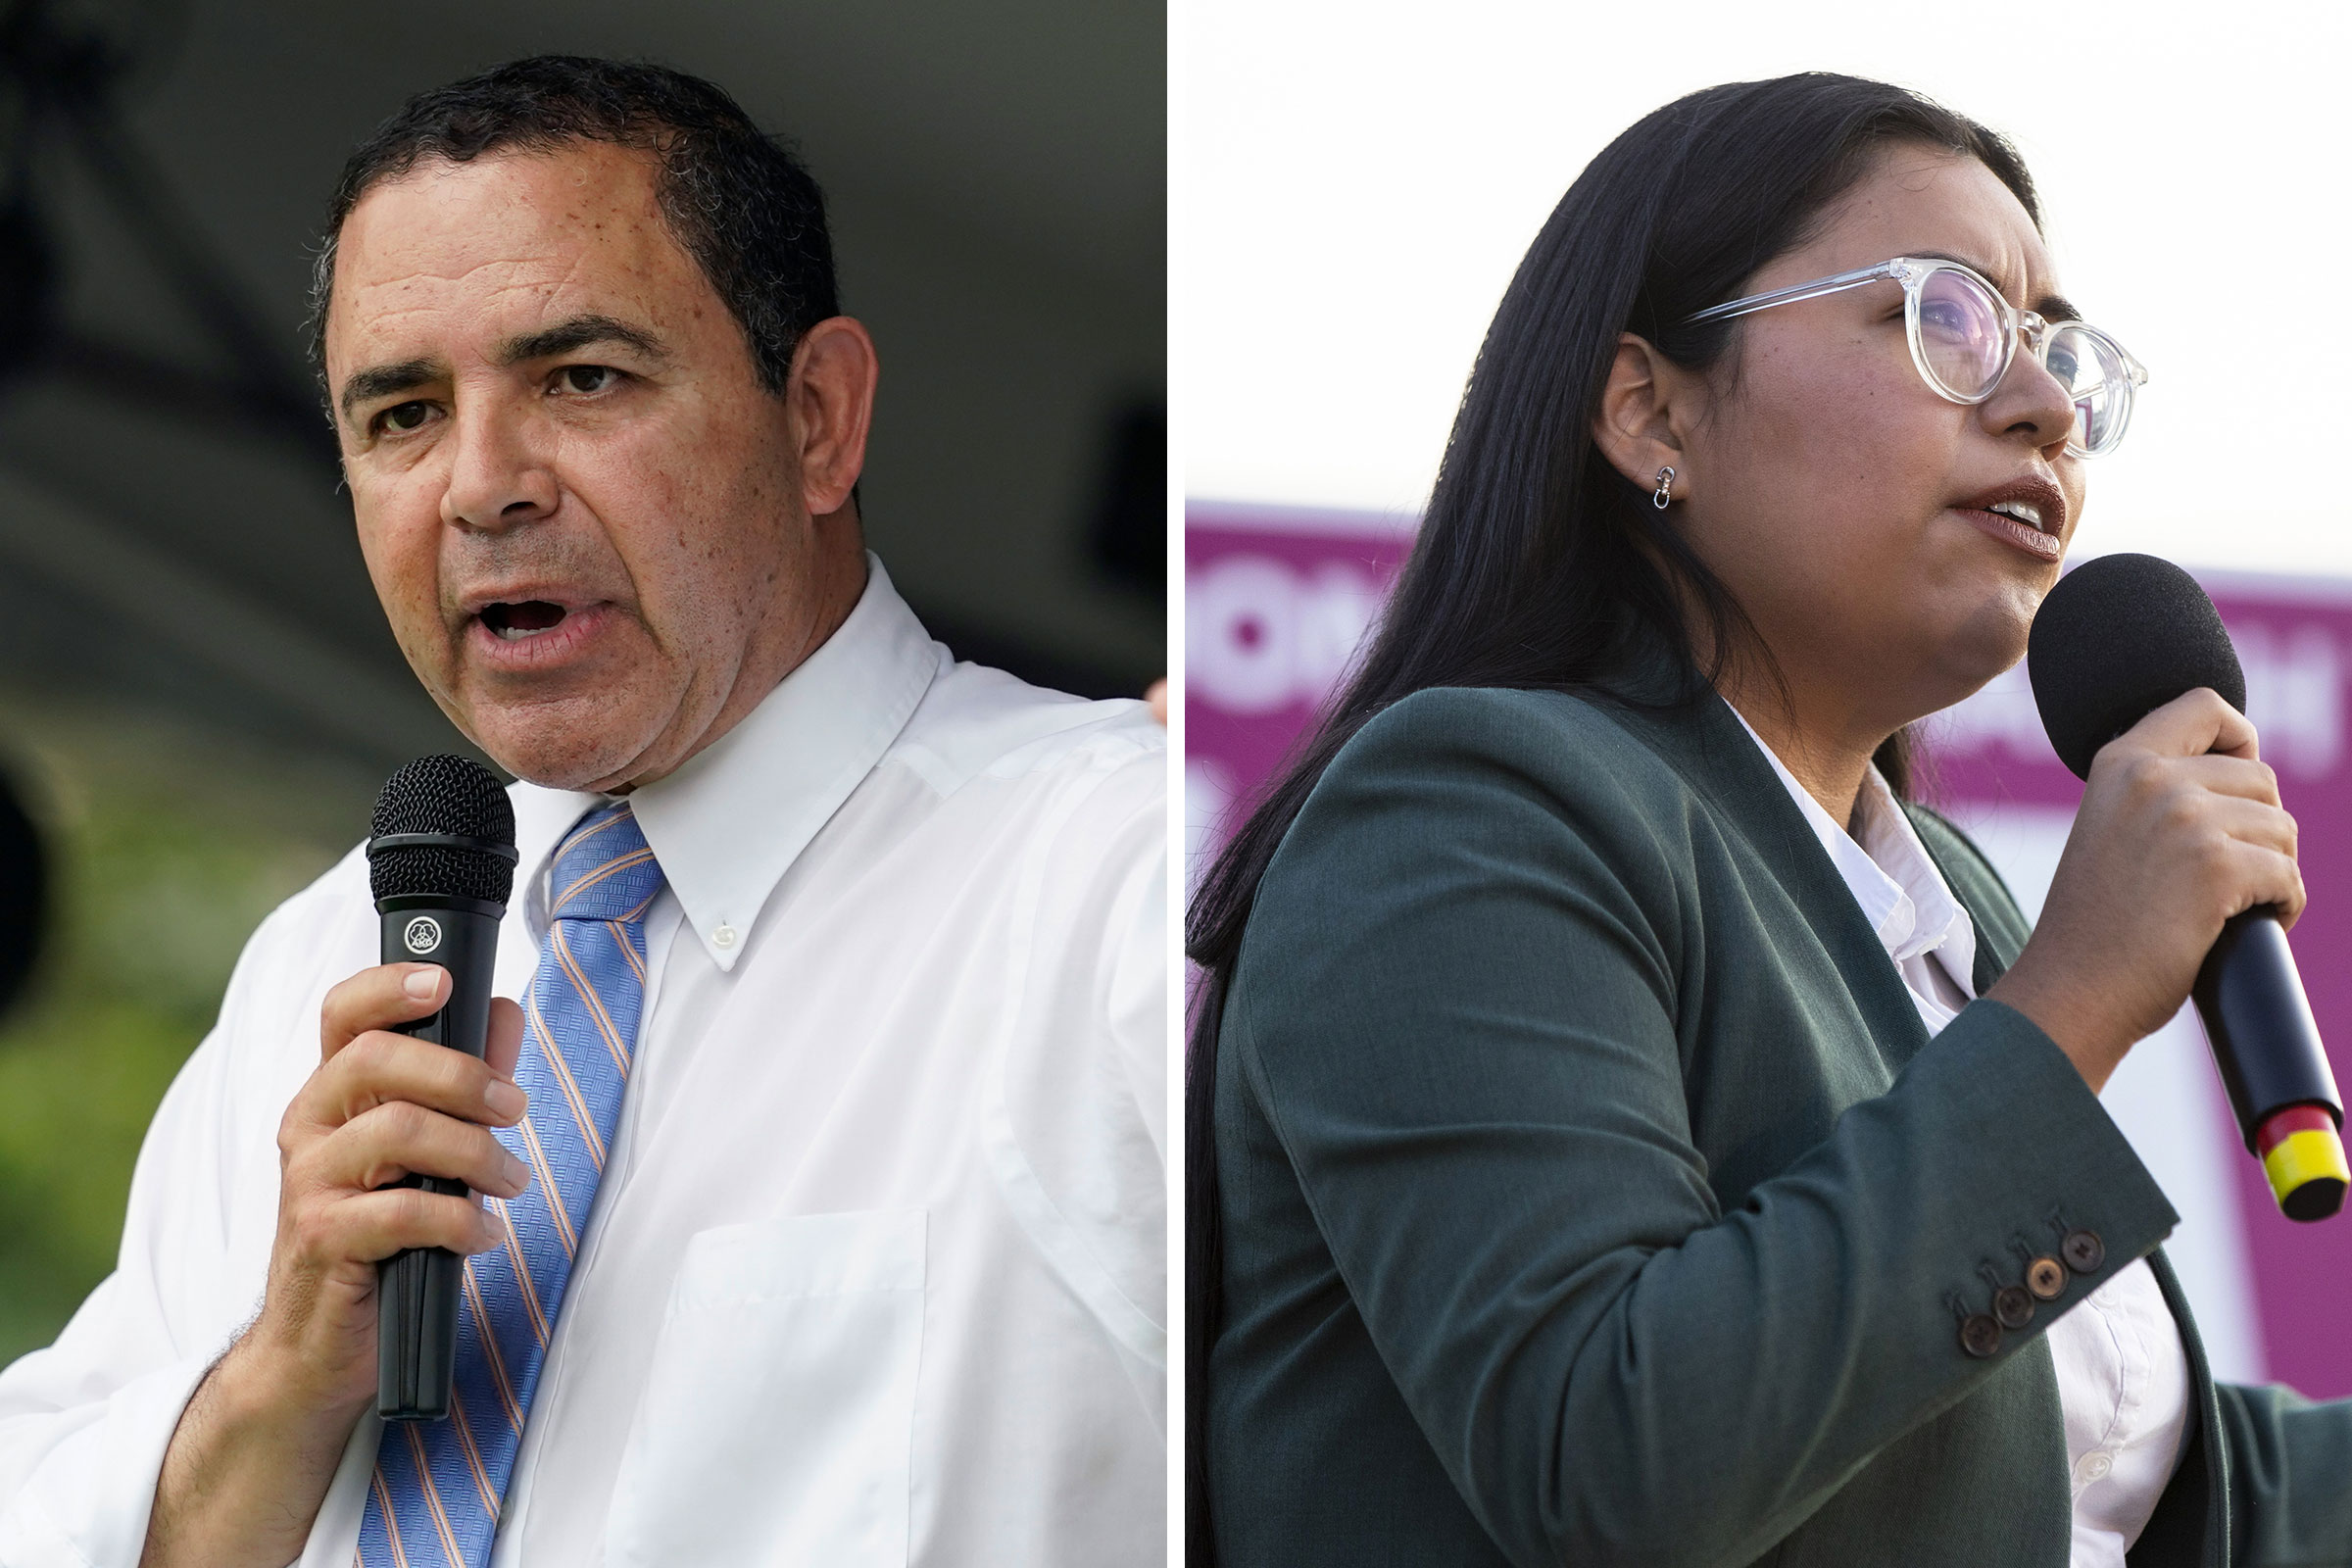 Rep. Henry Cuellar speaks during a campaign event in San Antonio, on May 4, 2022; Jessica Cisneros, Democratic Representative candidate for Texas, speaks during an early vote kickoff event in San Antonio, on Feb. 22, 2022. (Eric Gay—AP; Matthew Busch—Bloomberg/Getty Images)